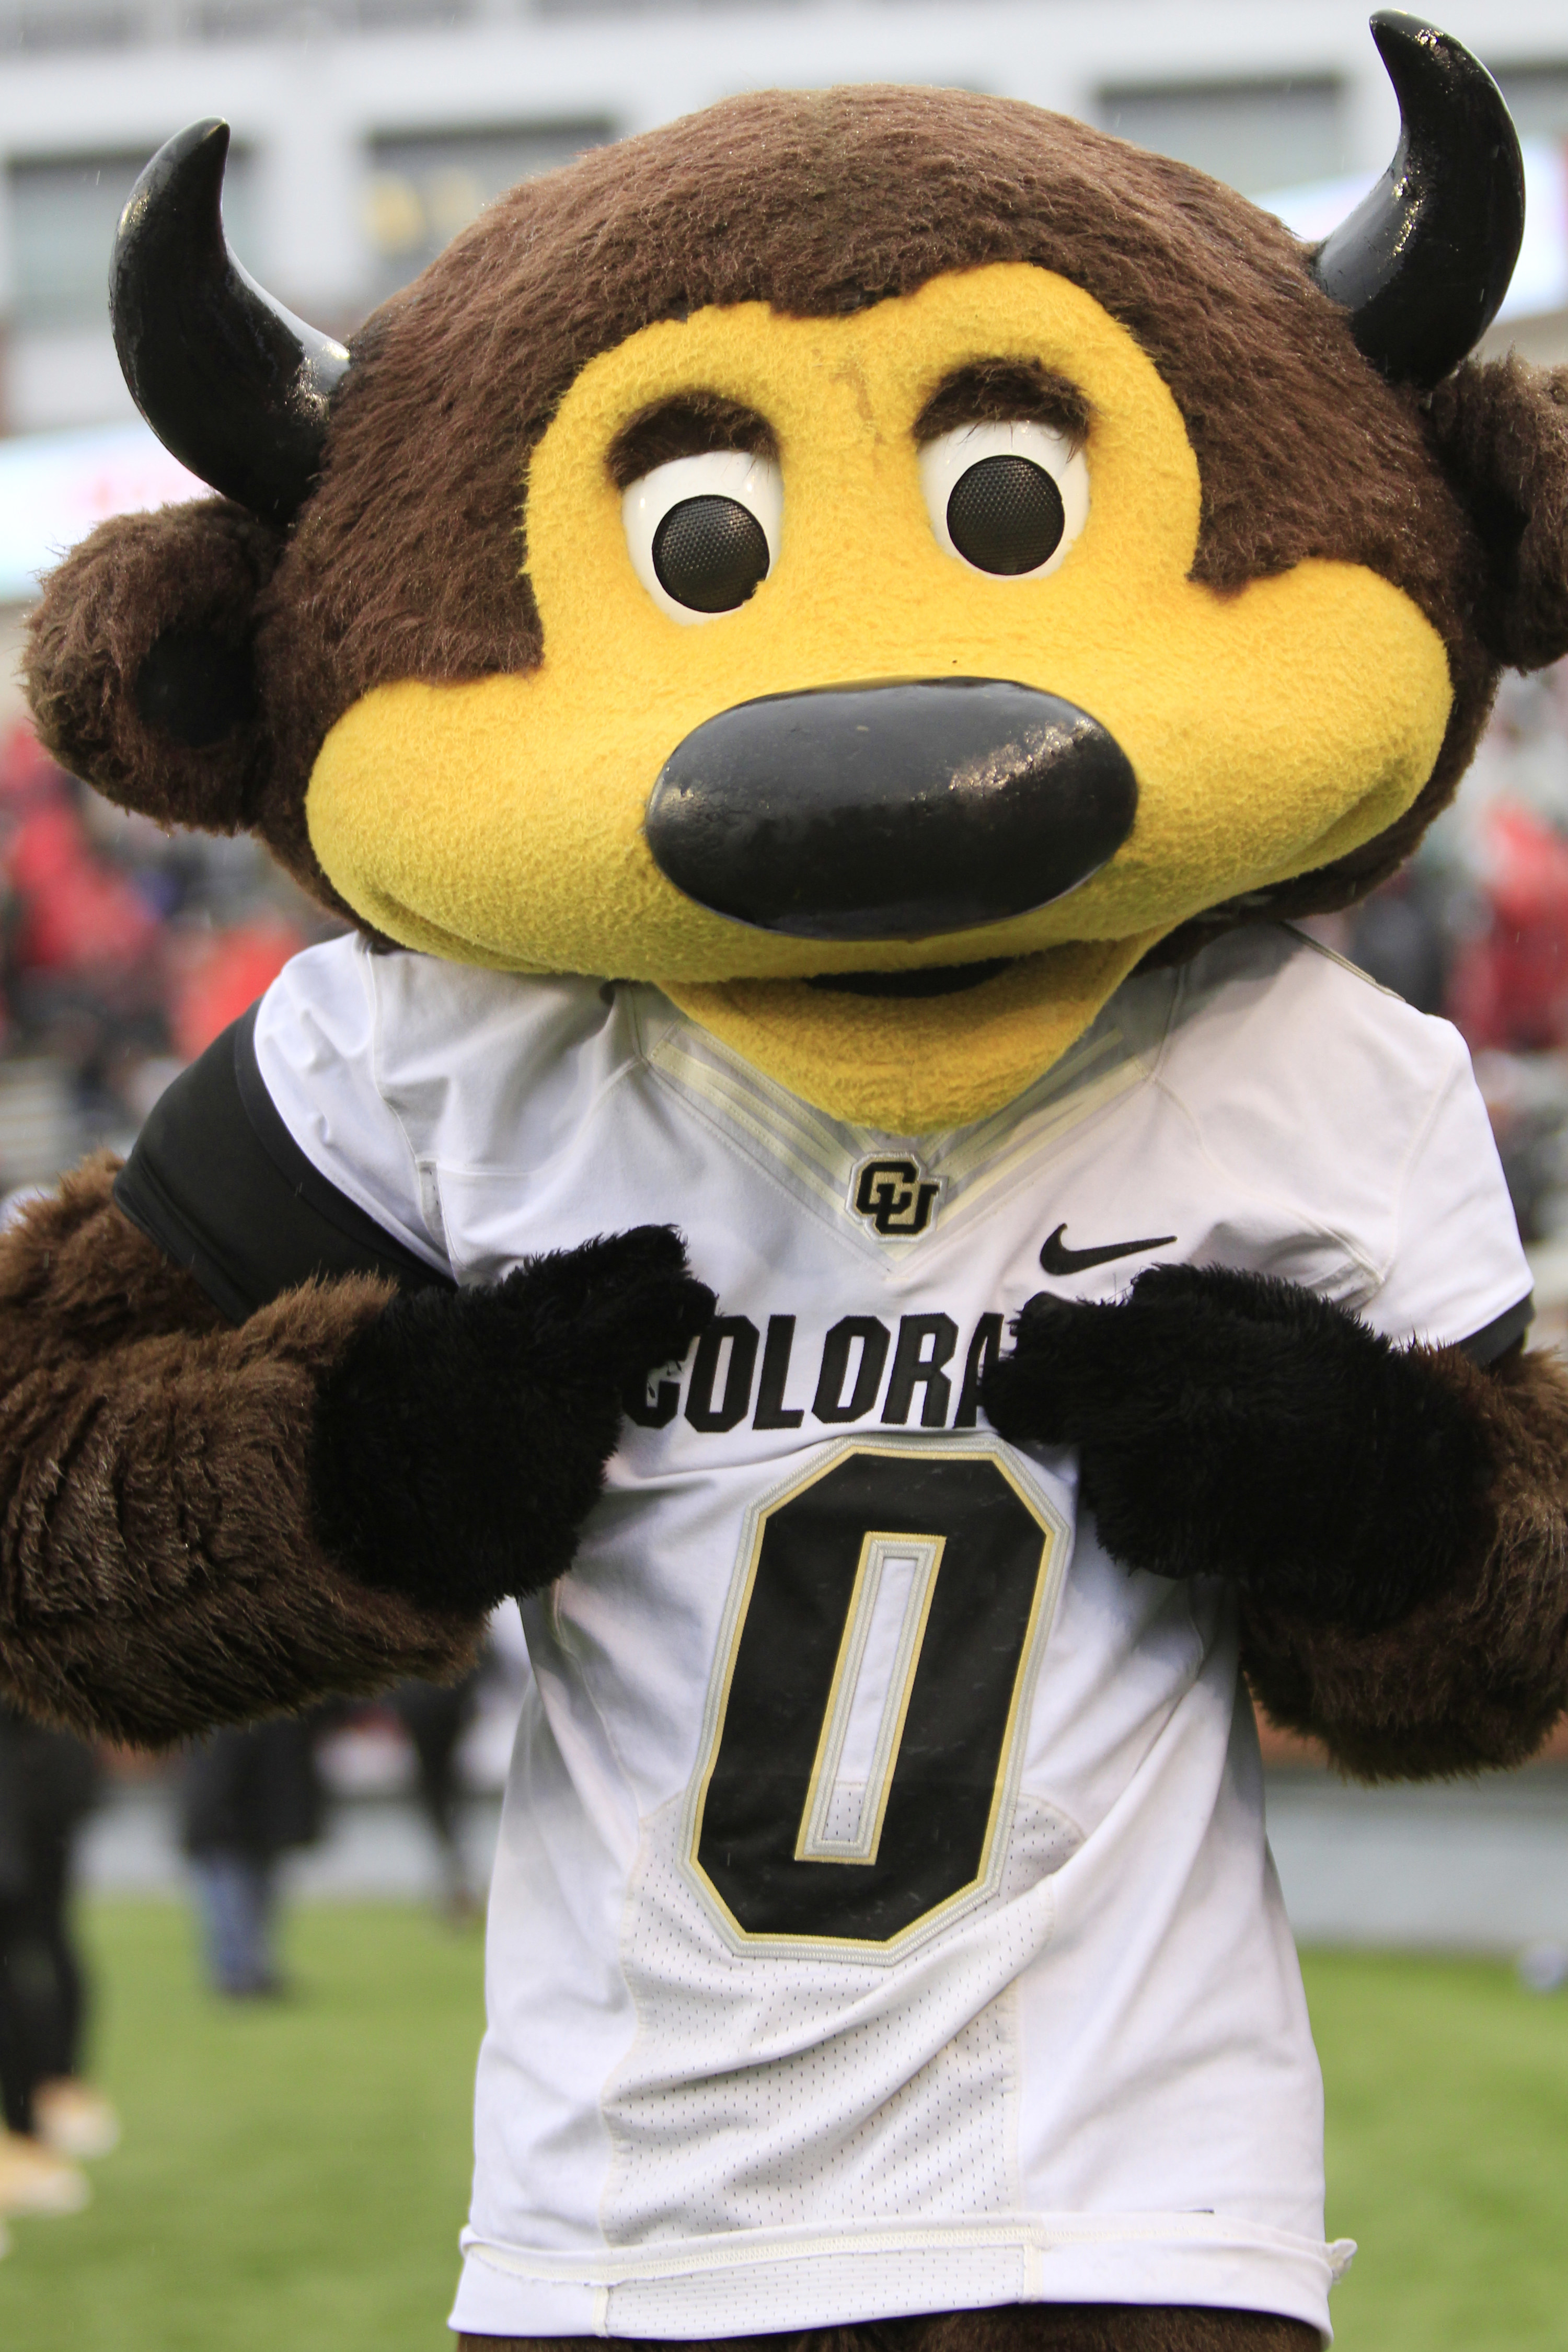 Brown Buffalo mascot with yellow face.